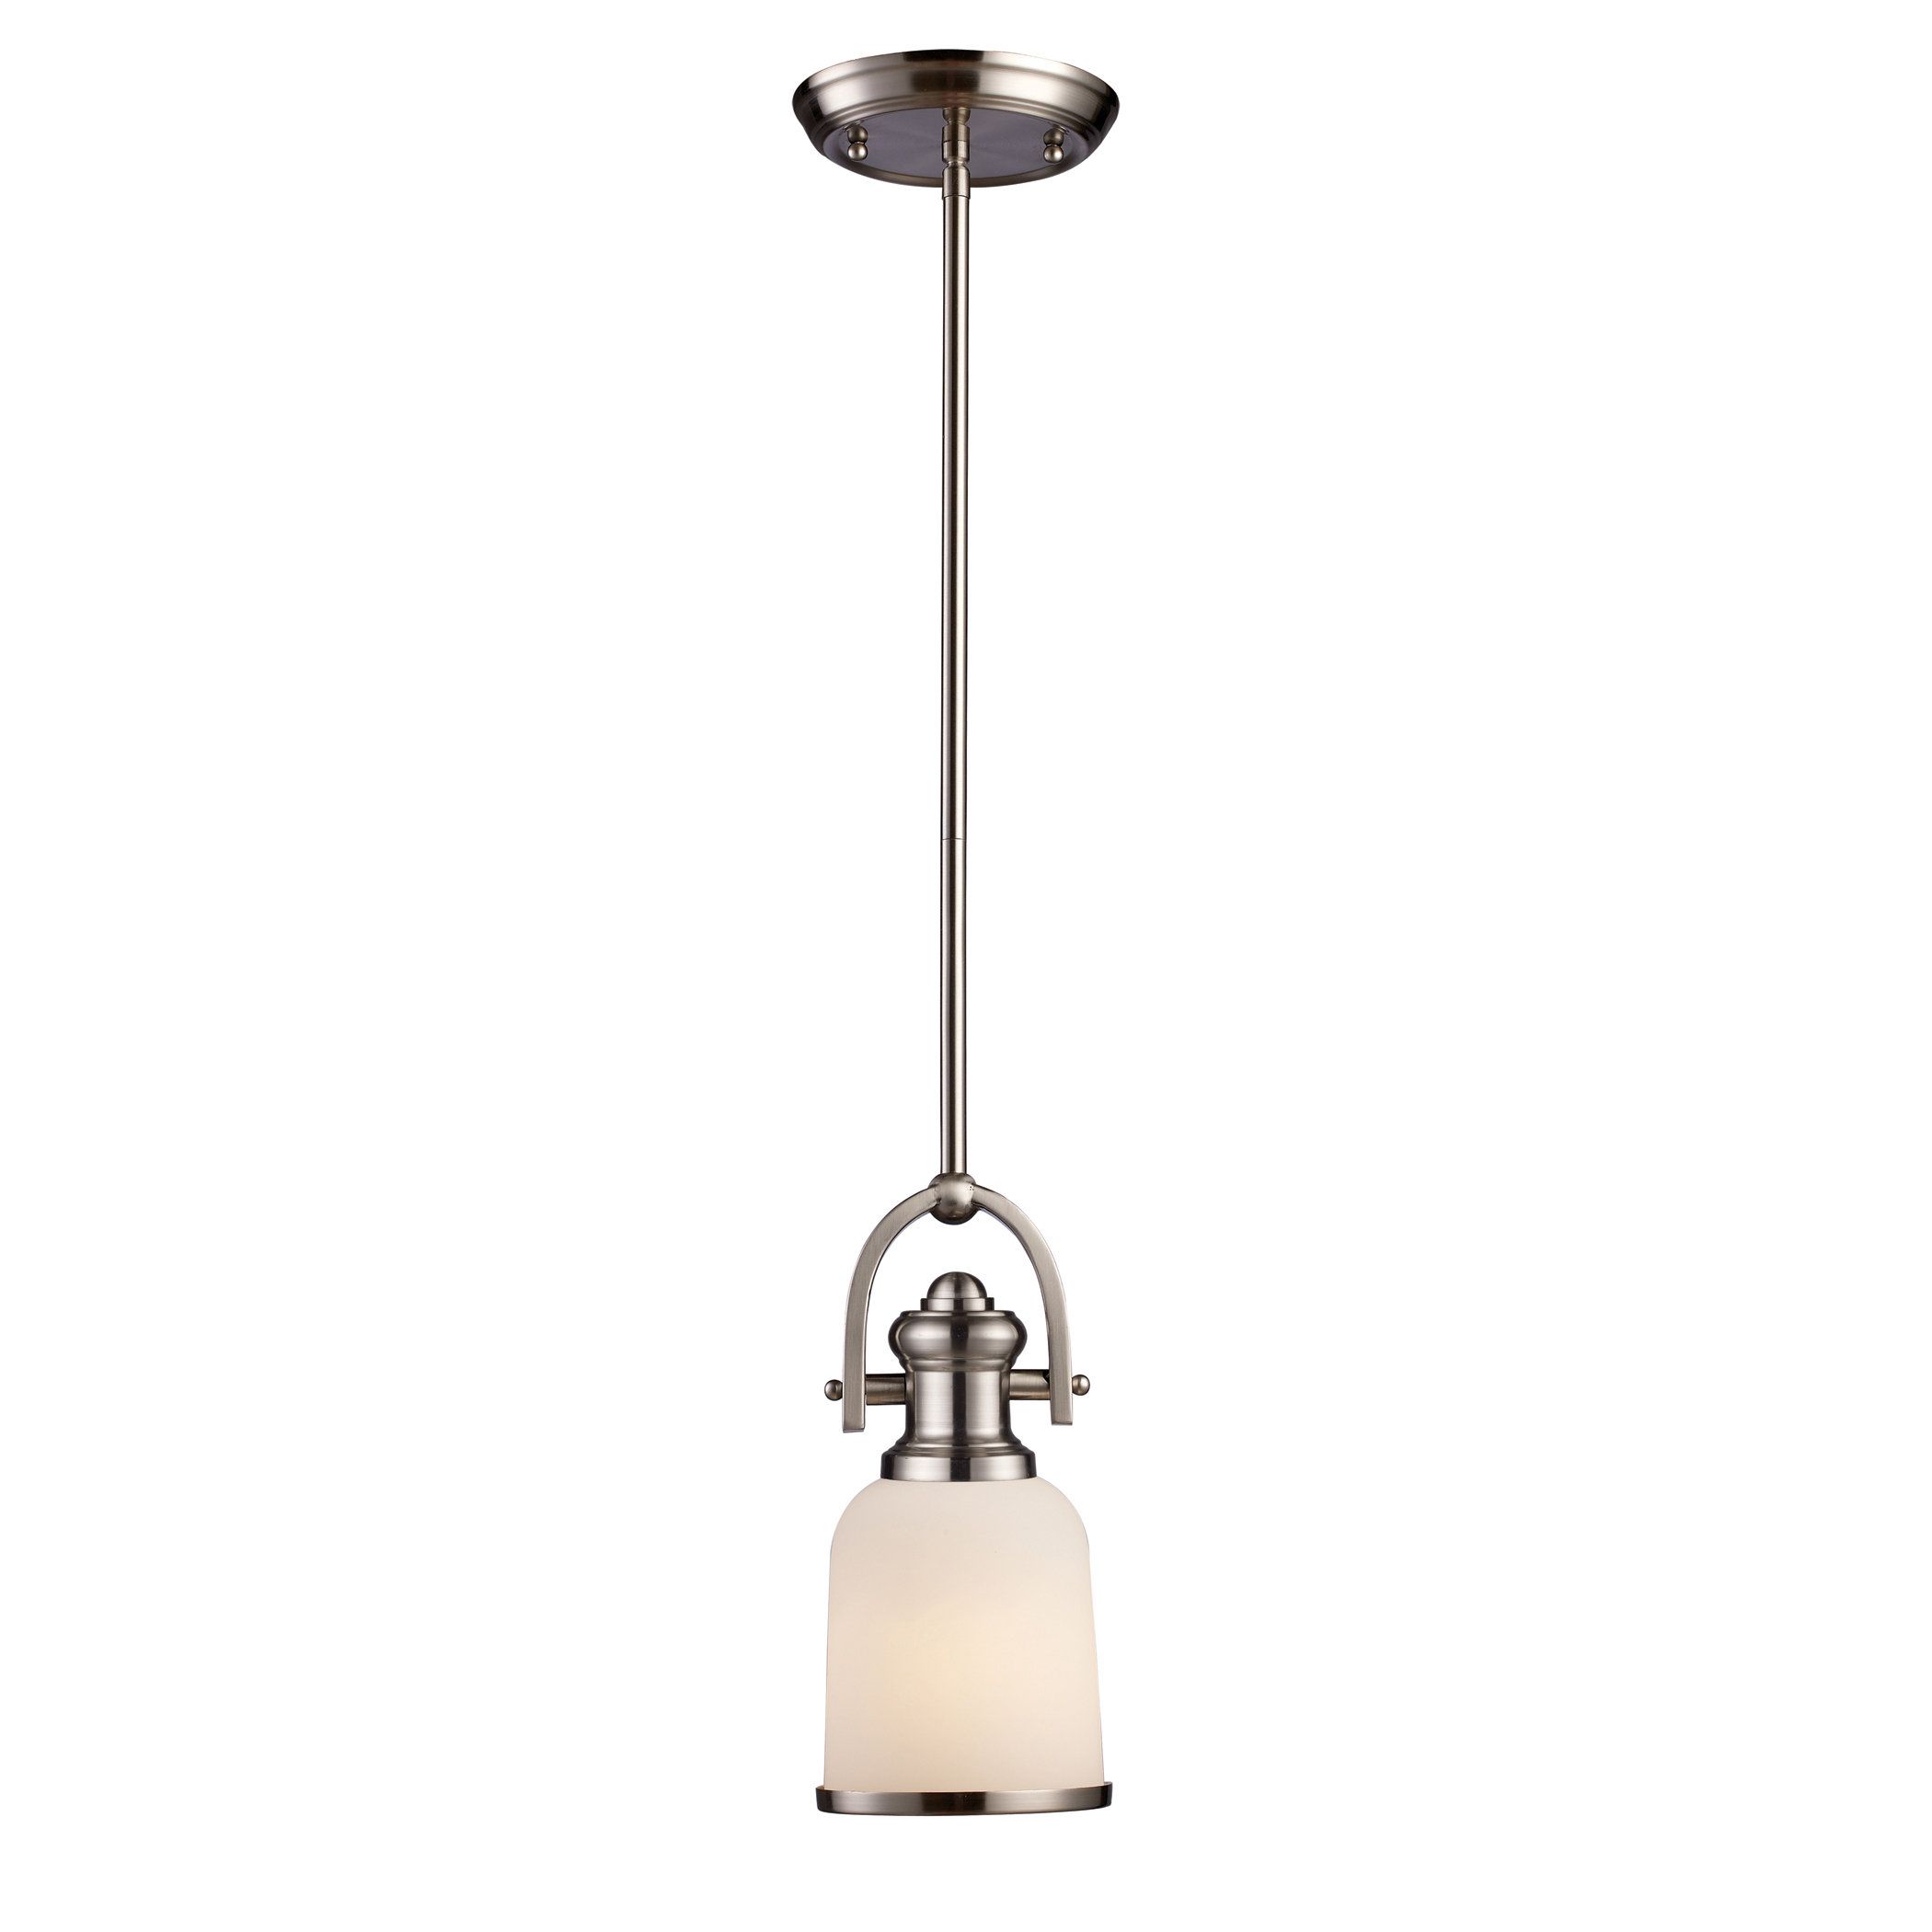 Boornazian 1 Light Single Bell Pendant Throughout Macon 1 Light Single Dome Pendants (View 11 of 30)